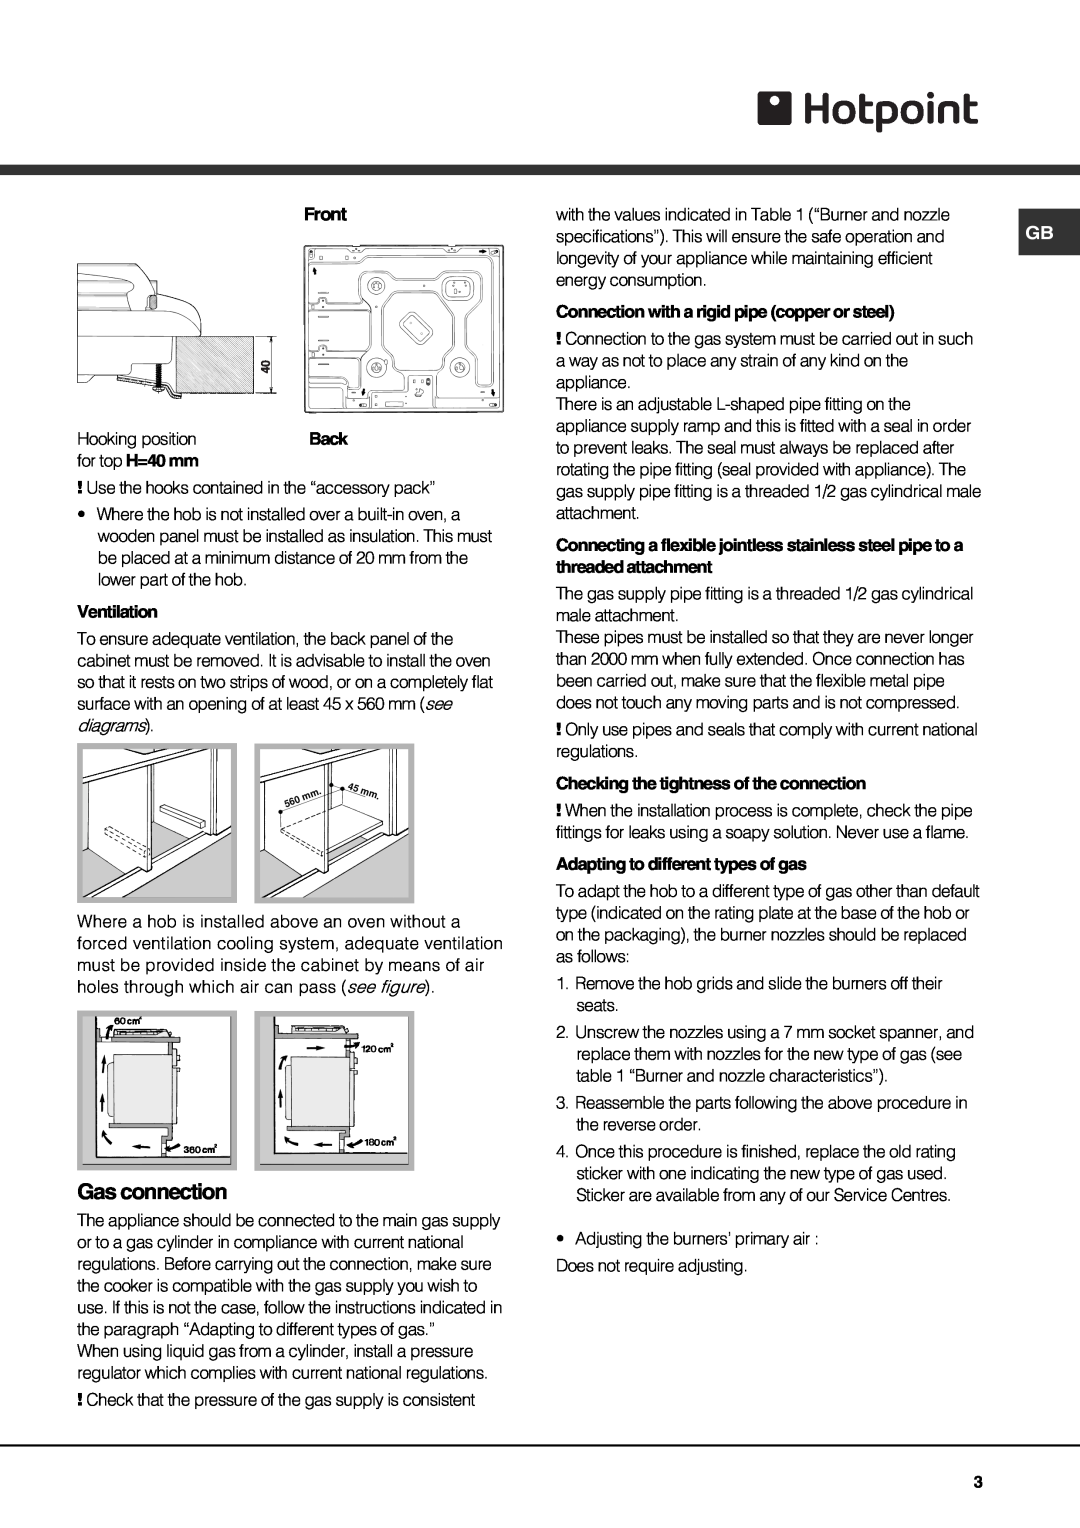 Hotpoint G640T specifications Gas connection 